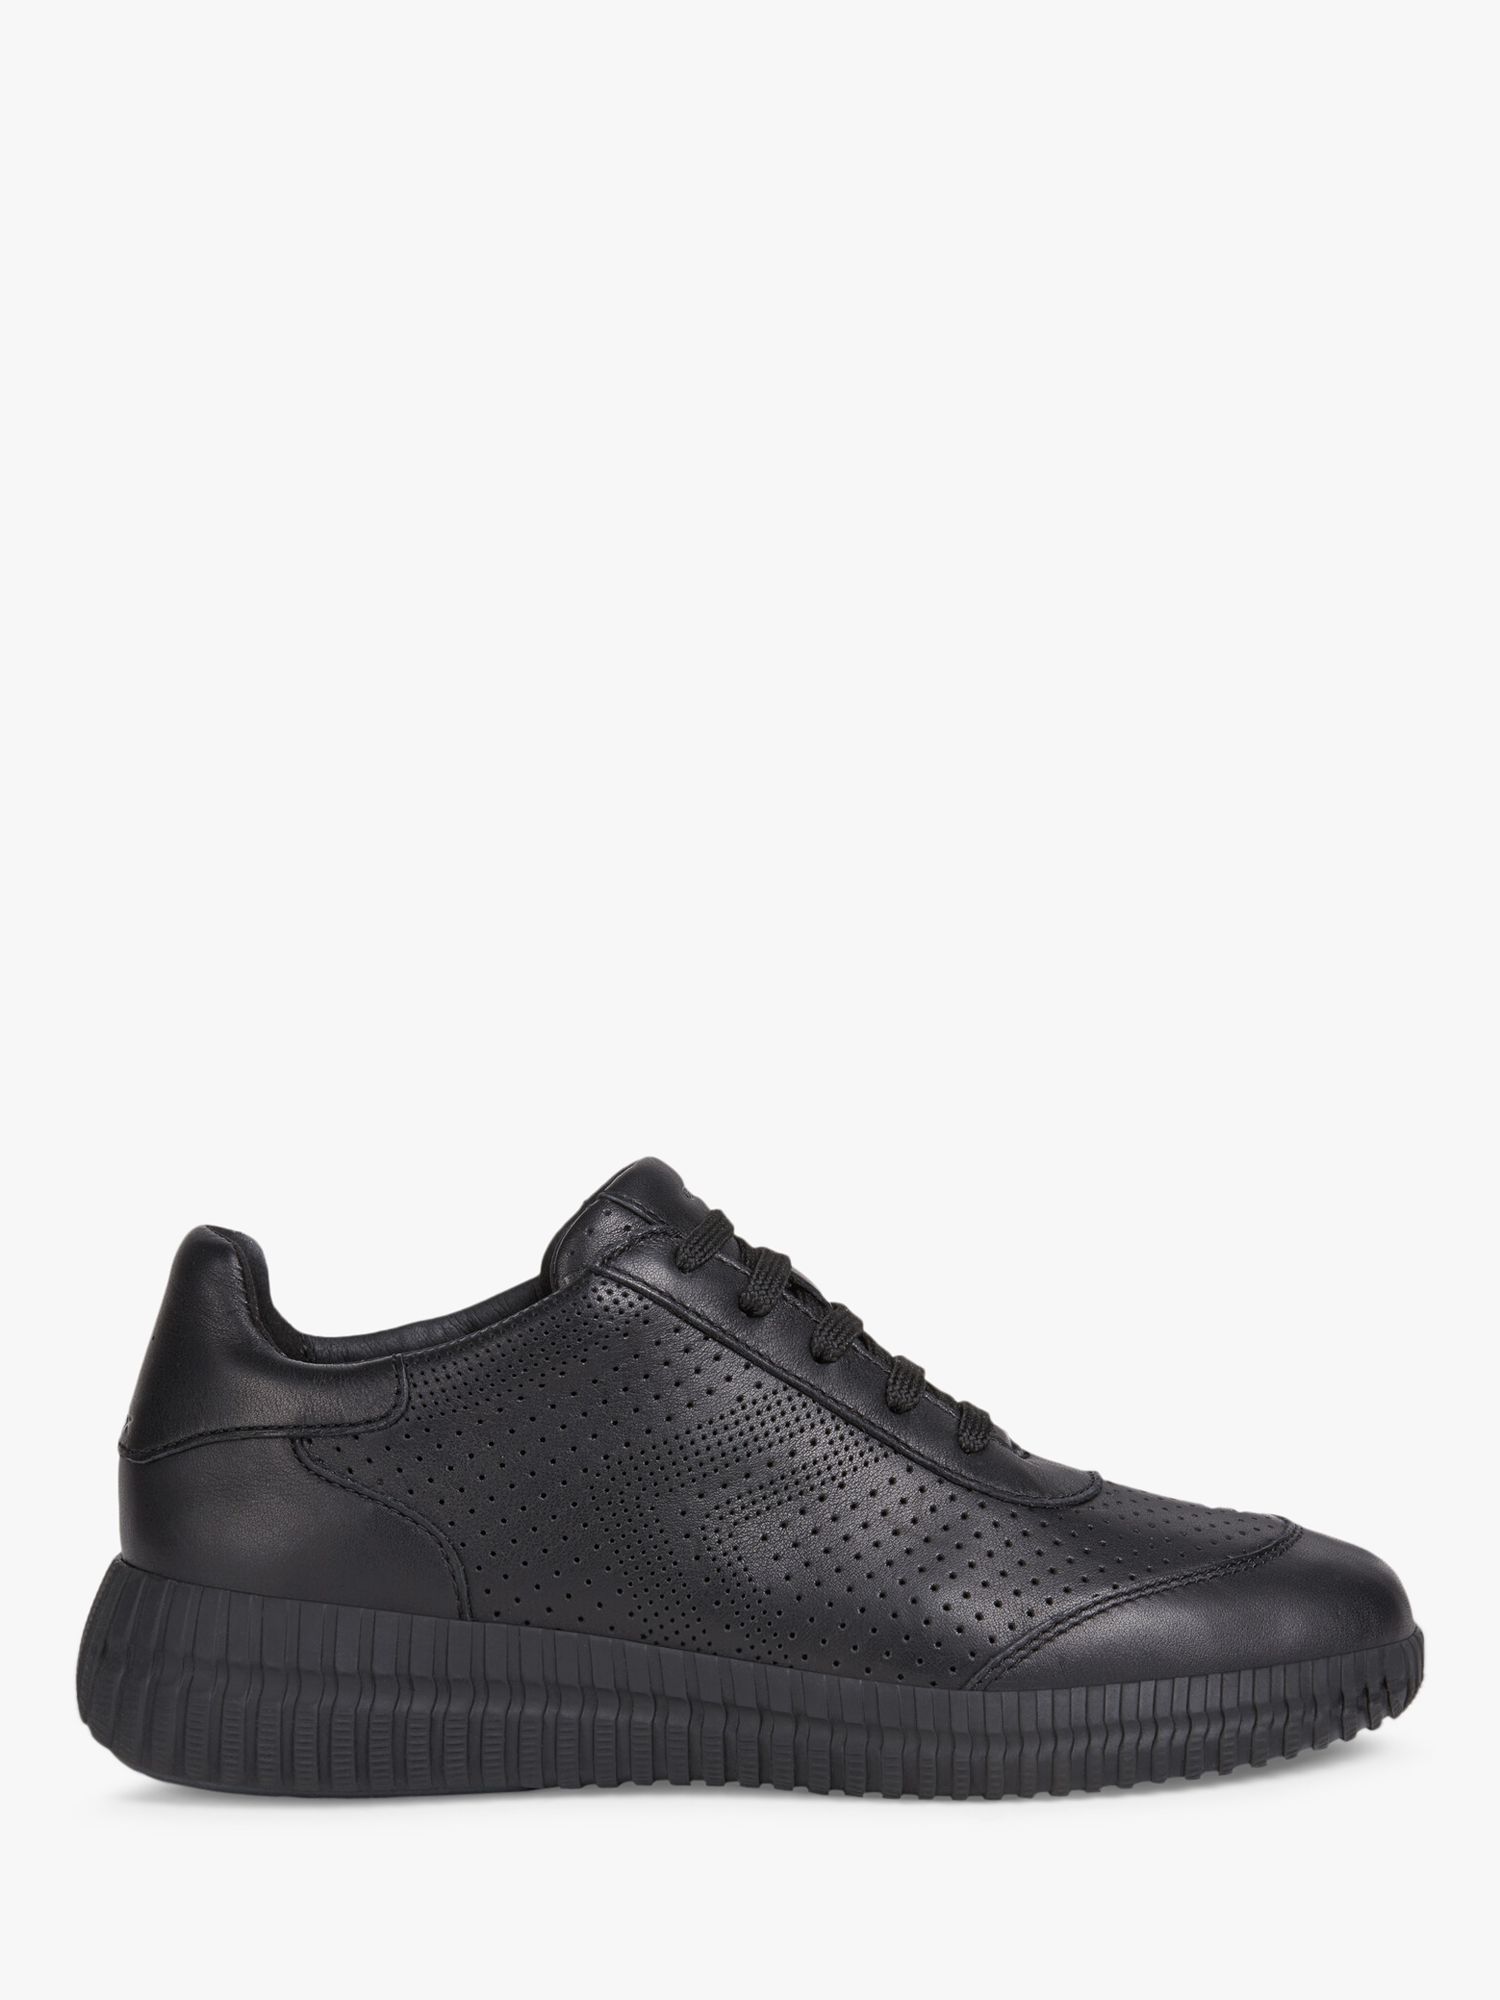 Geox Women's Noovae Leather Perforated Trainers, Black at John Lewis ...